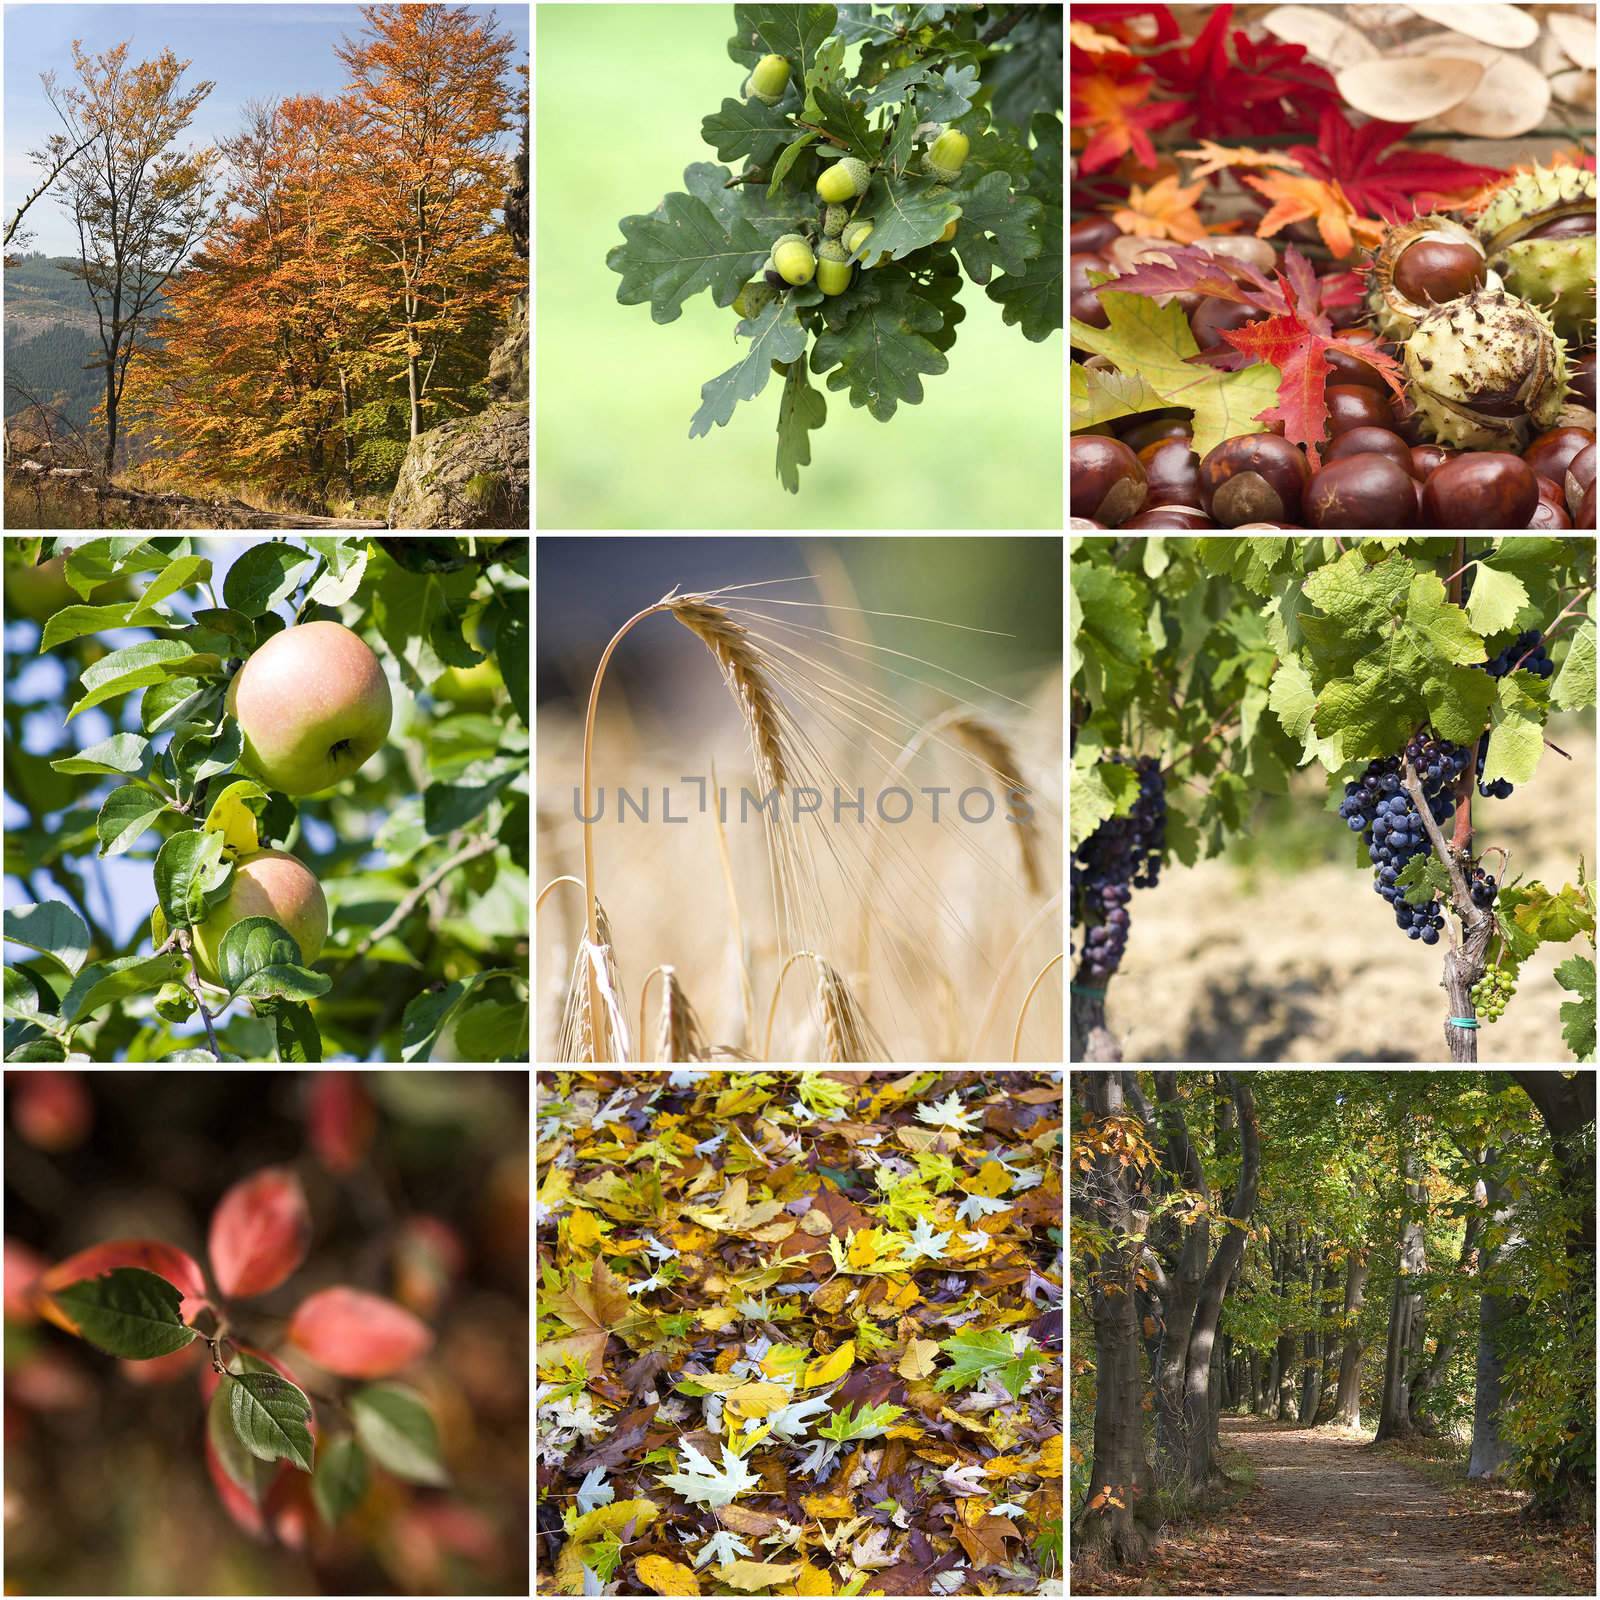 Autumn collage with different autumn pictures 